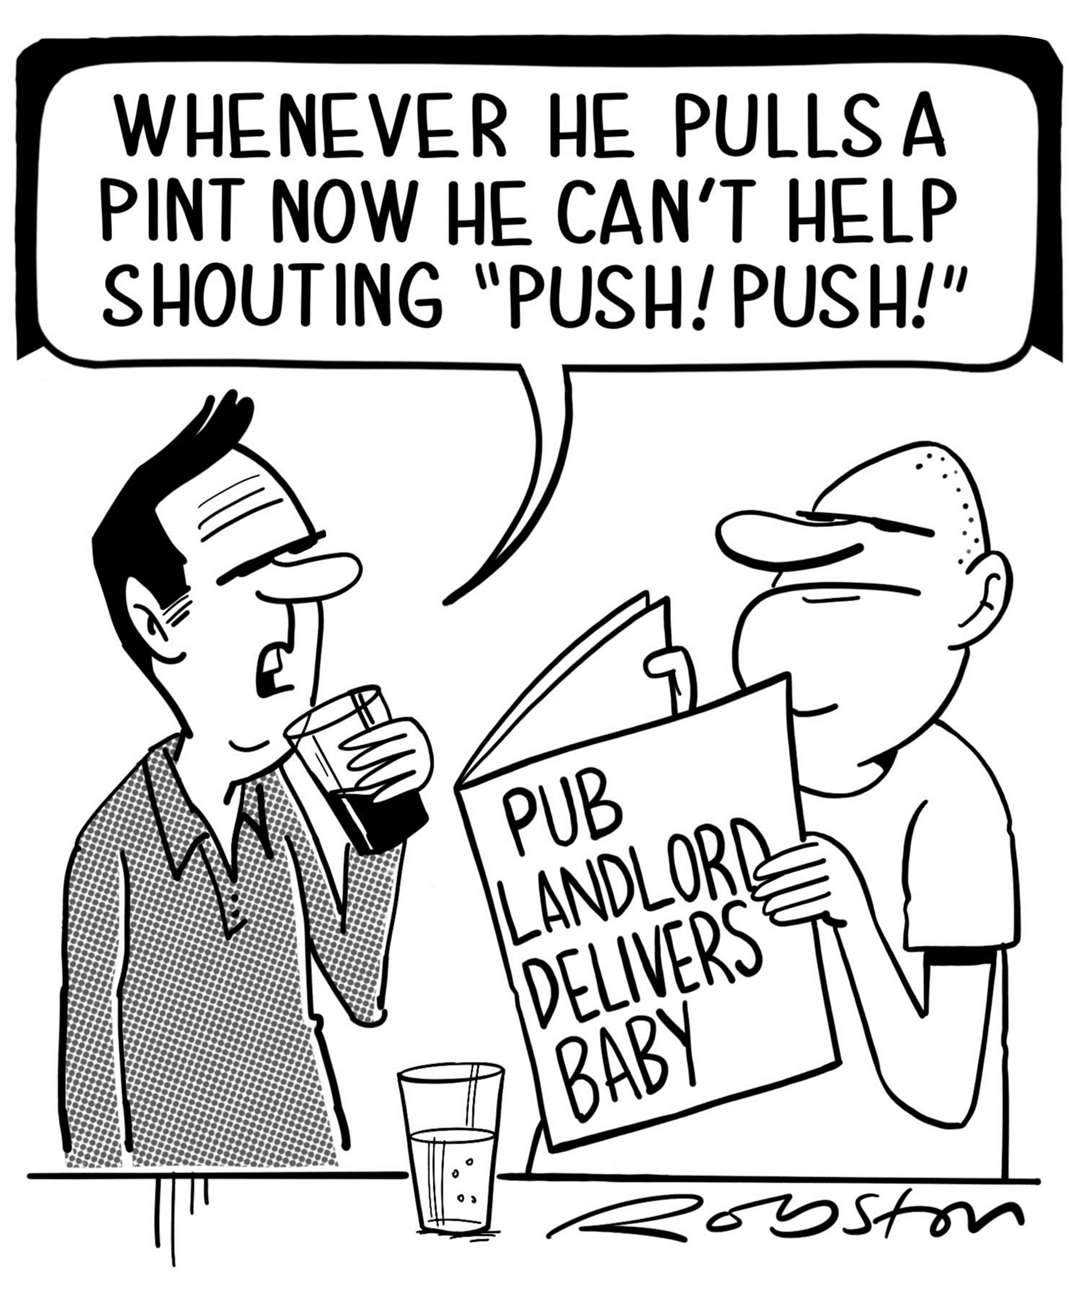 Cartoonist Royston Robertson's view on the baby being born at the pub